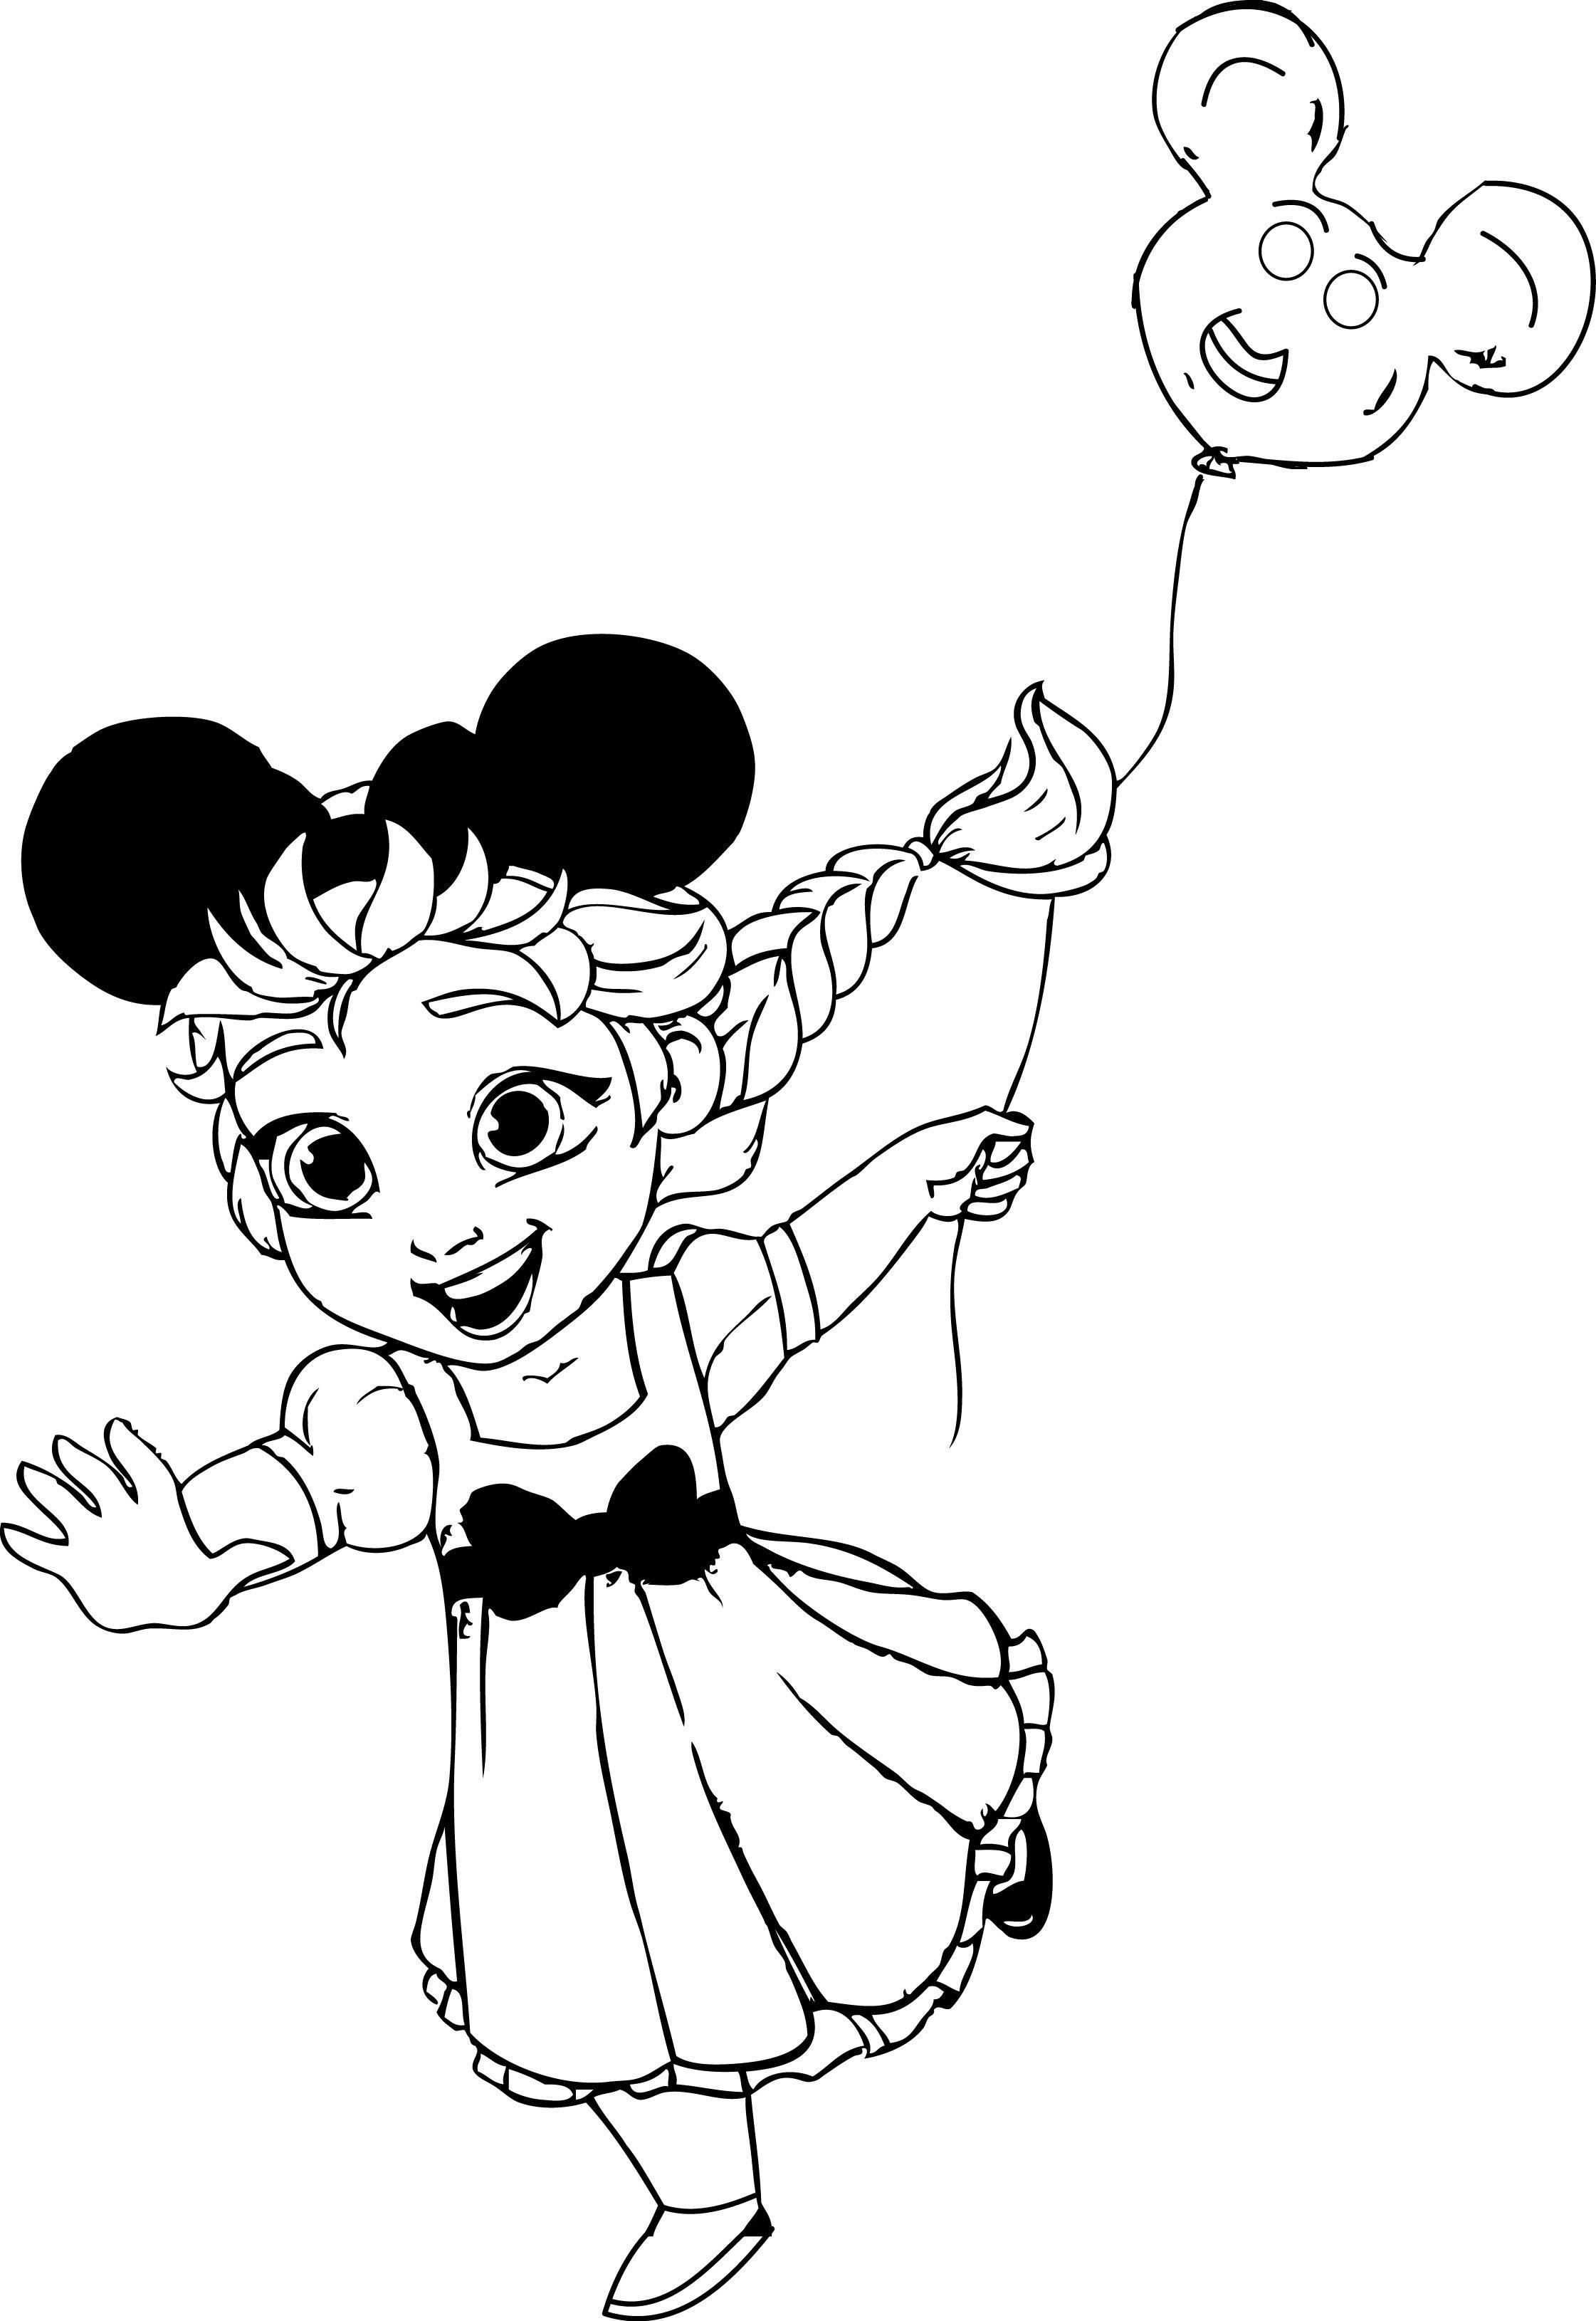 Baby Elsa Coloring Pages at GetColorings.com | Free ...